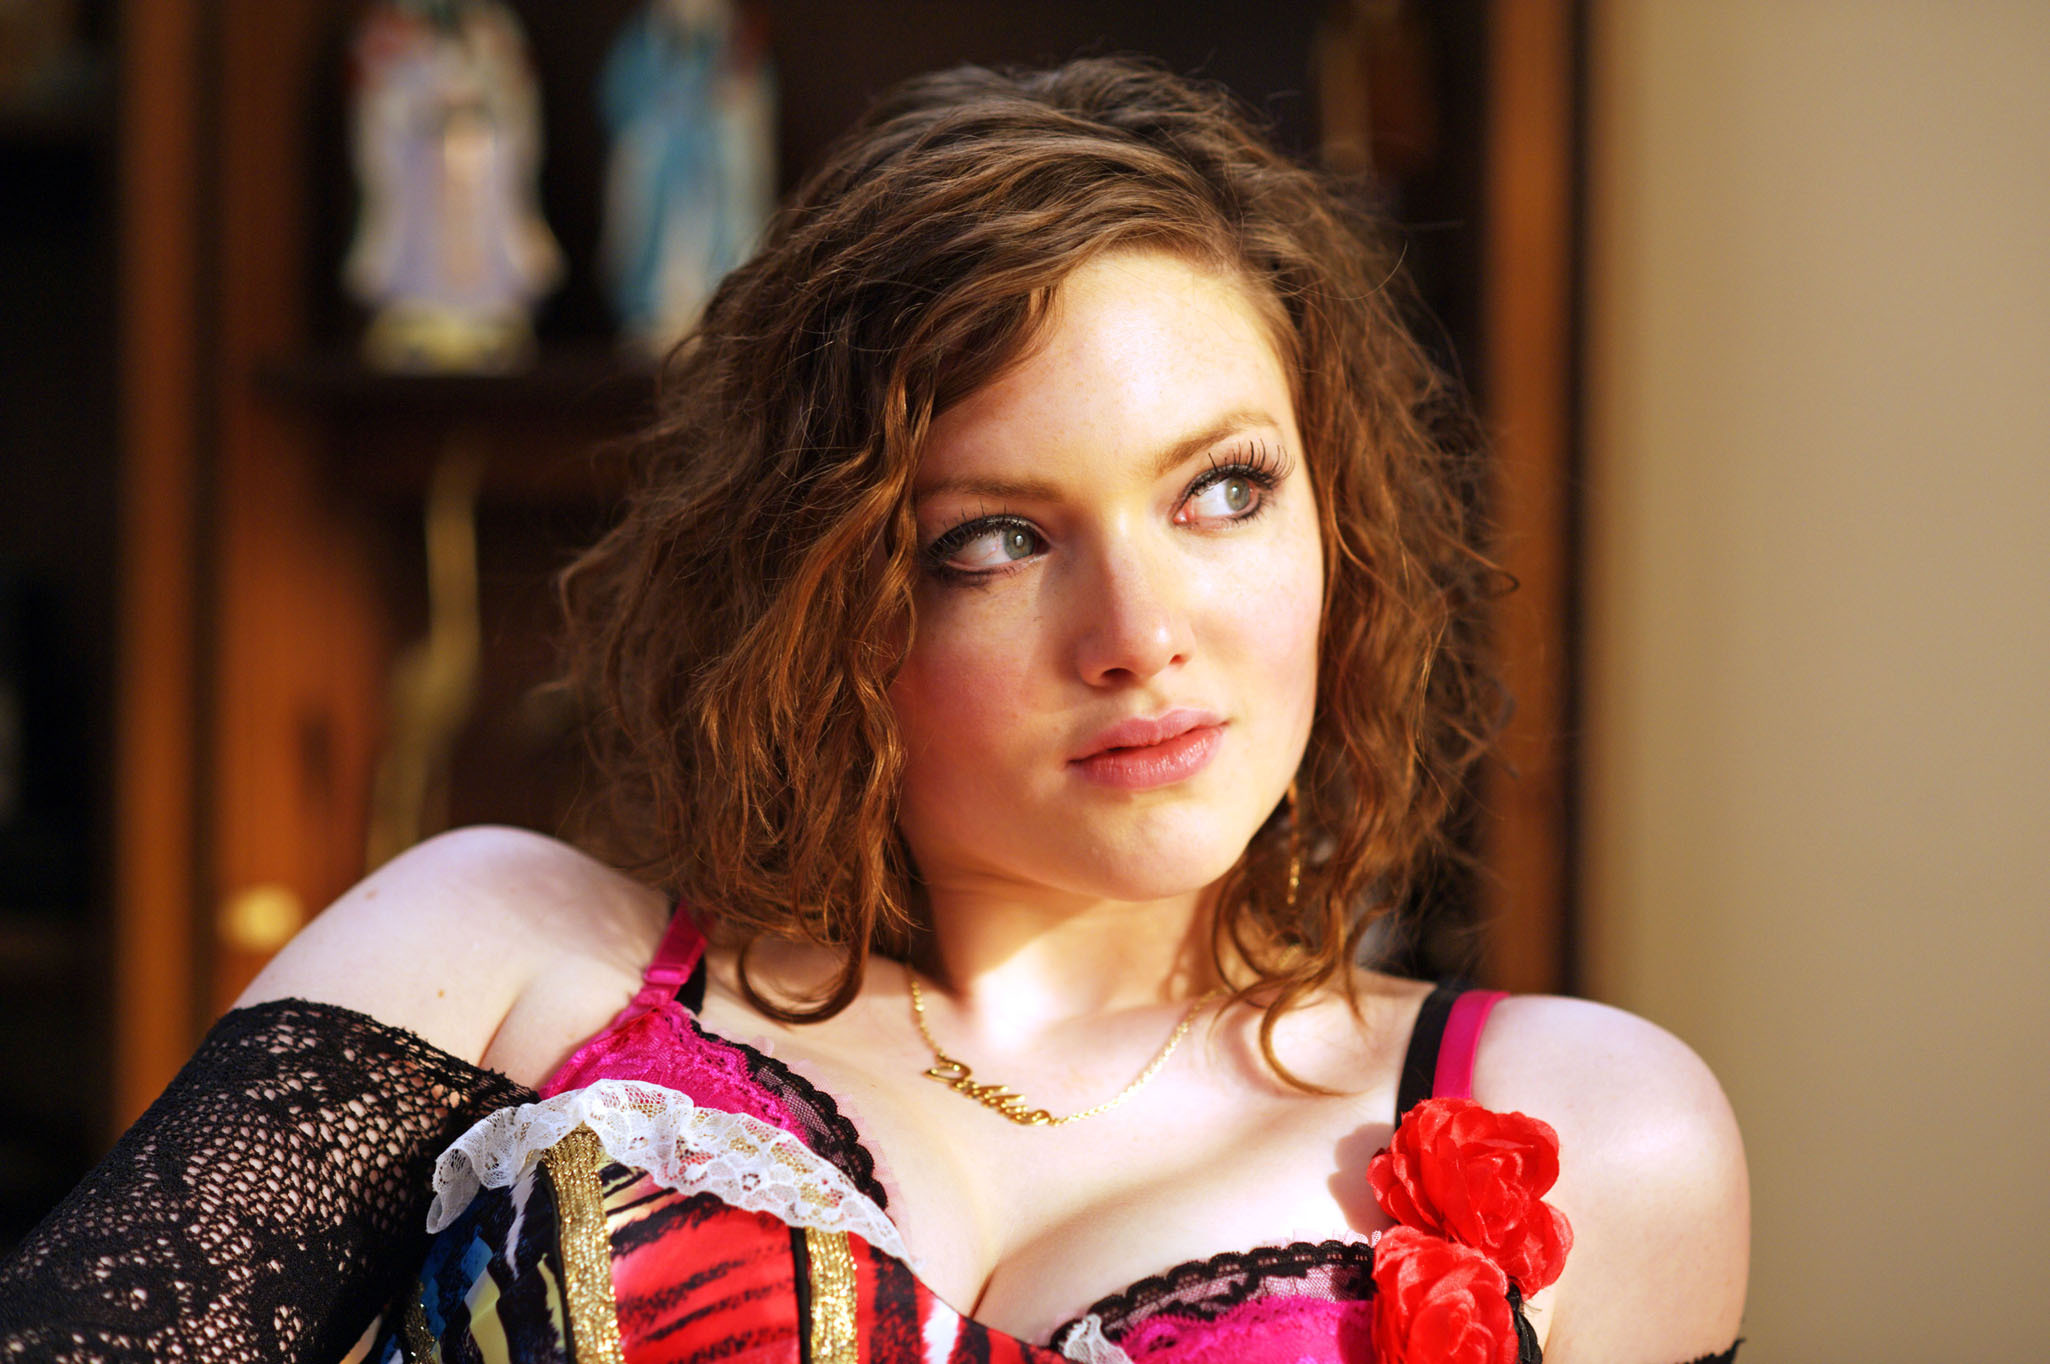 Holliday Grainger Plastic Surgery and Body Measurements